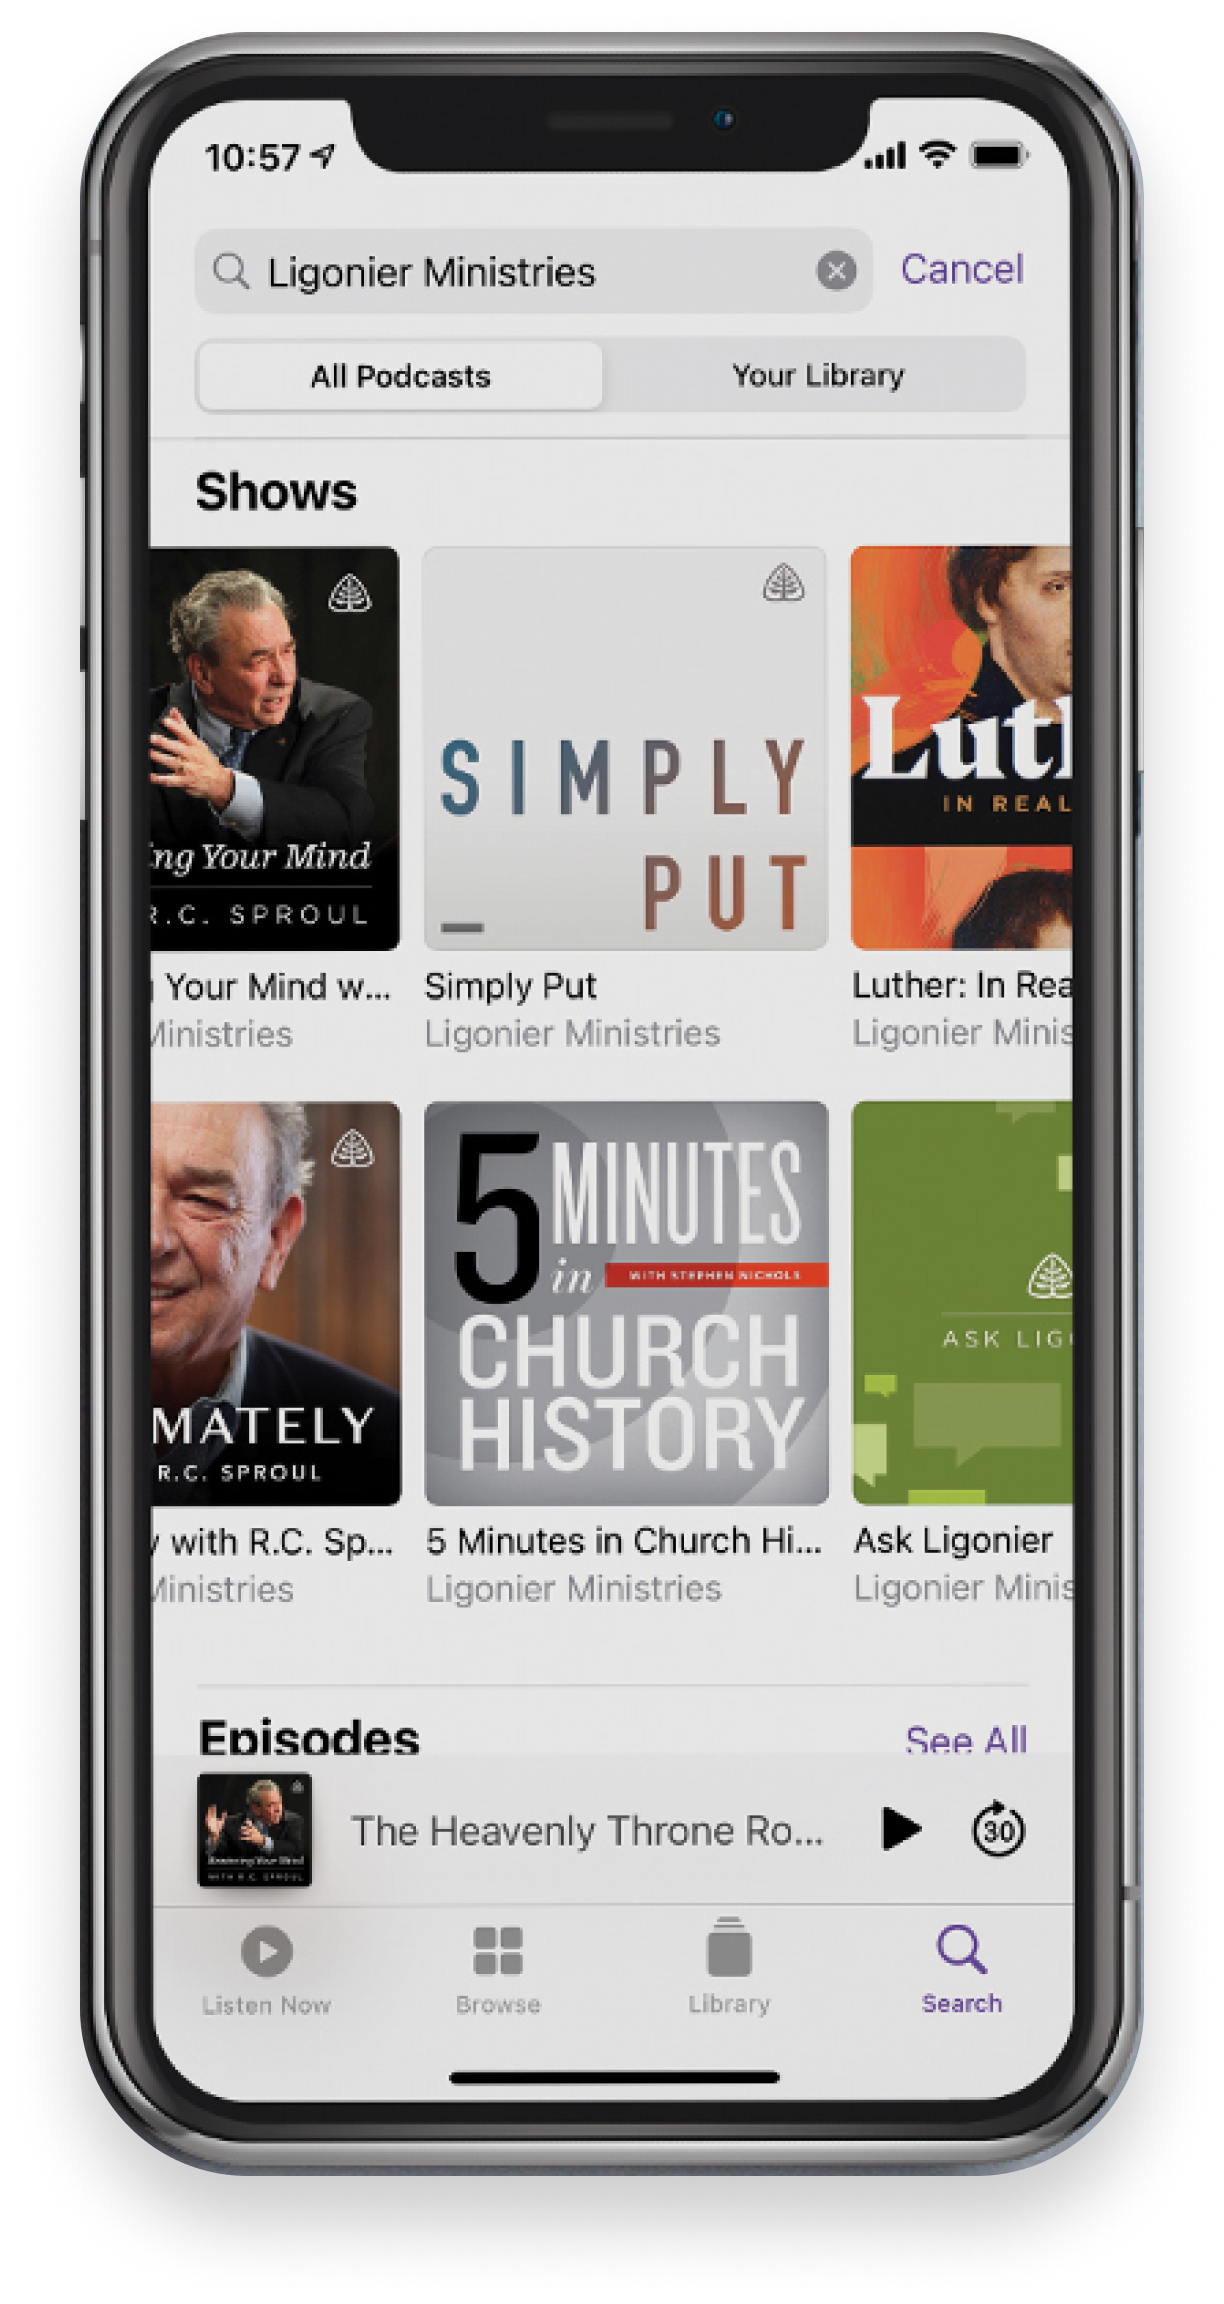 Ligonier Ministries podcast show listing on iPhone